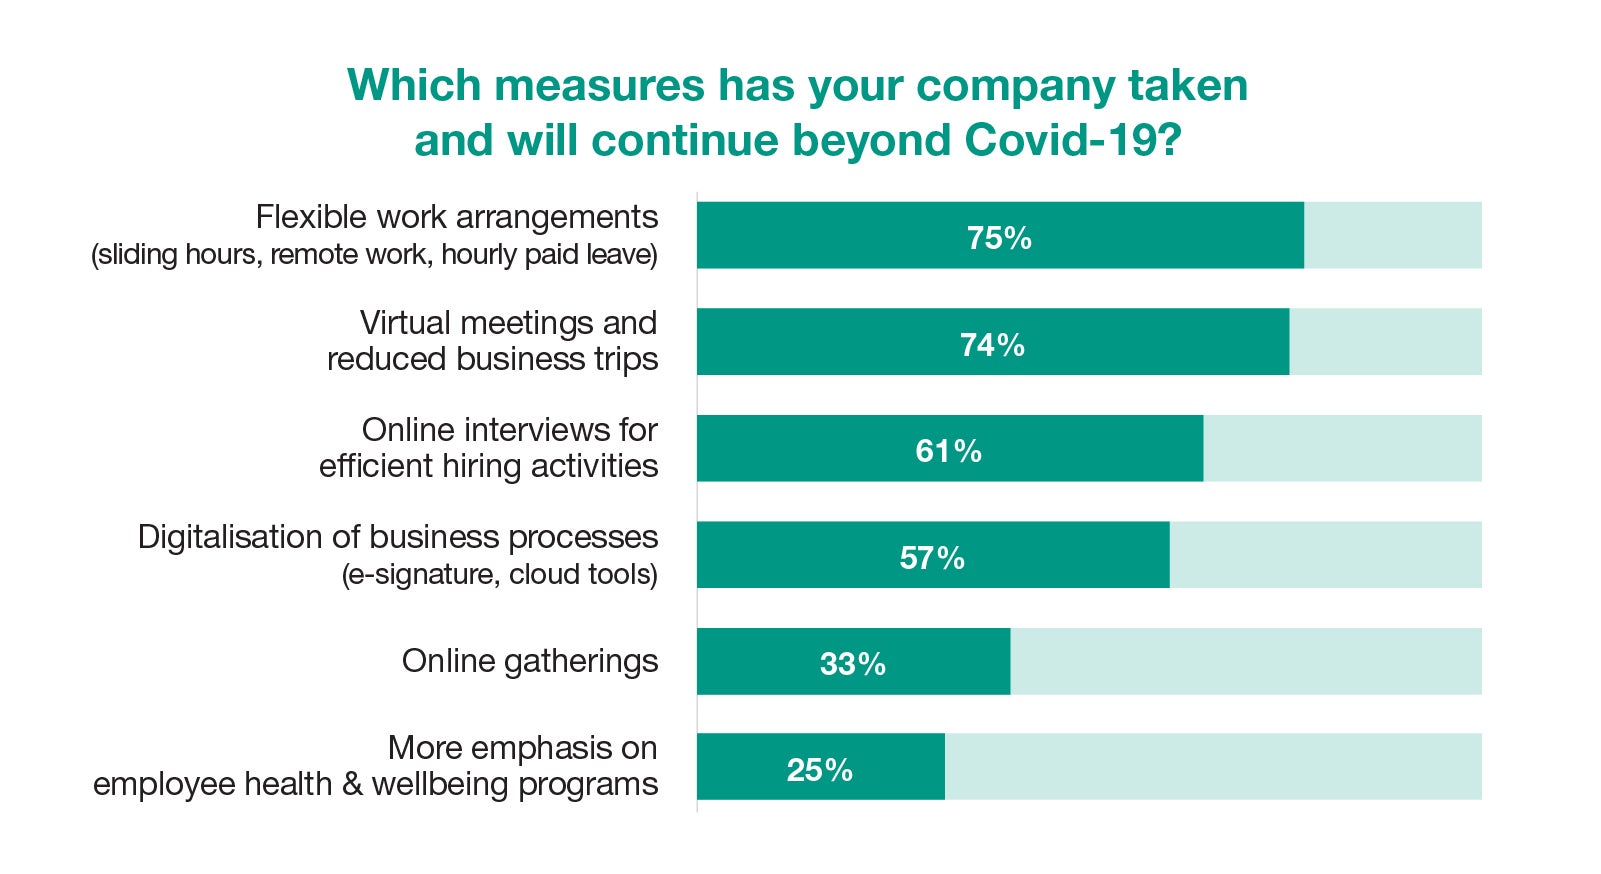 which measures has your company taken and will continue beyond Covid-19?